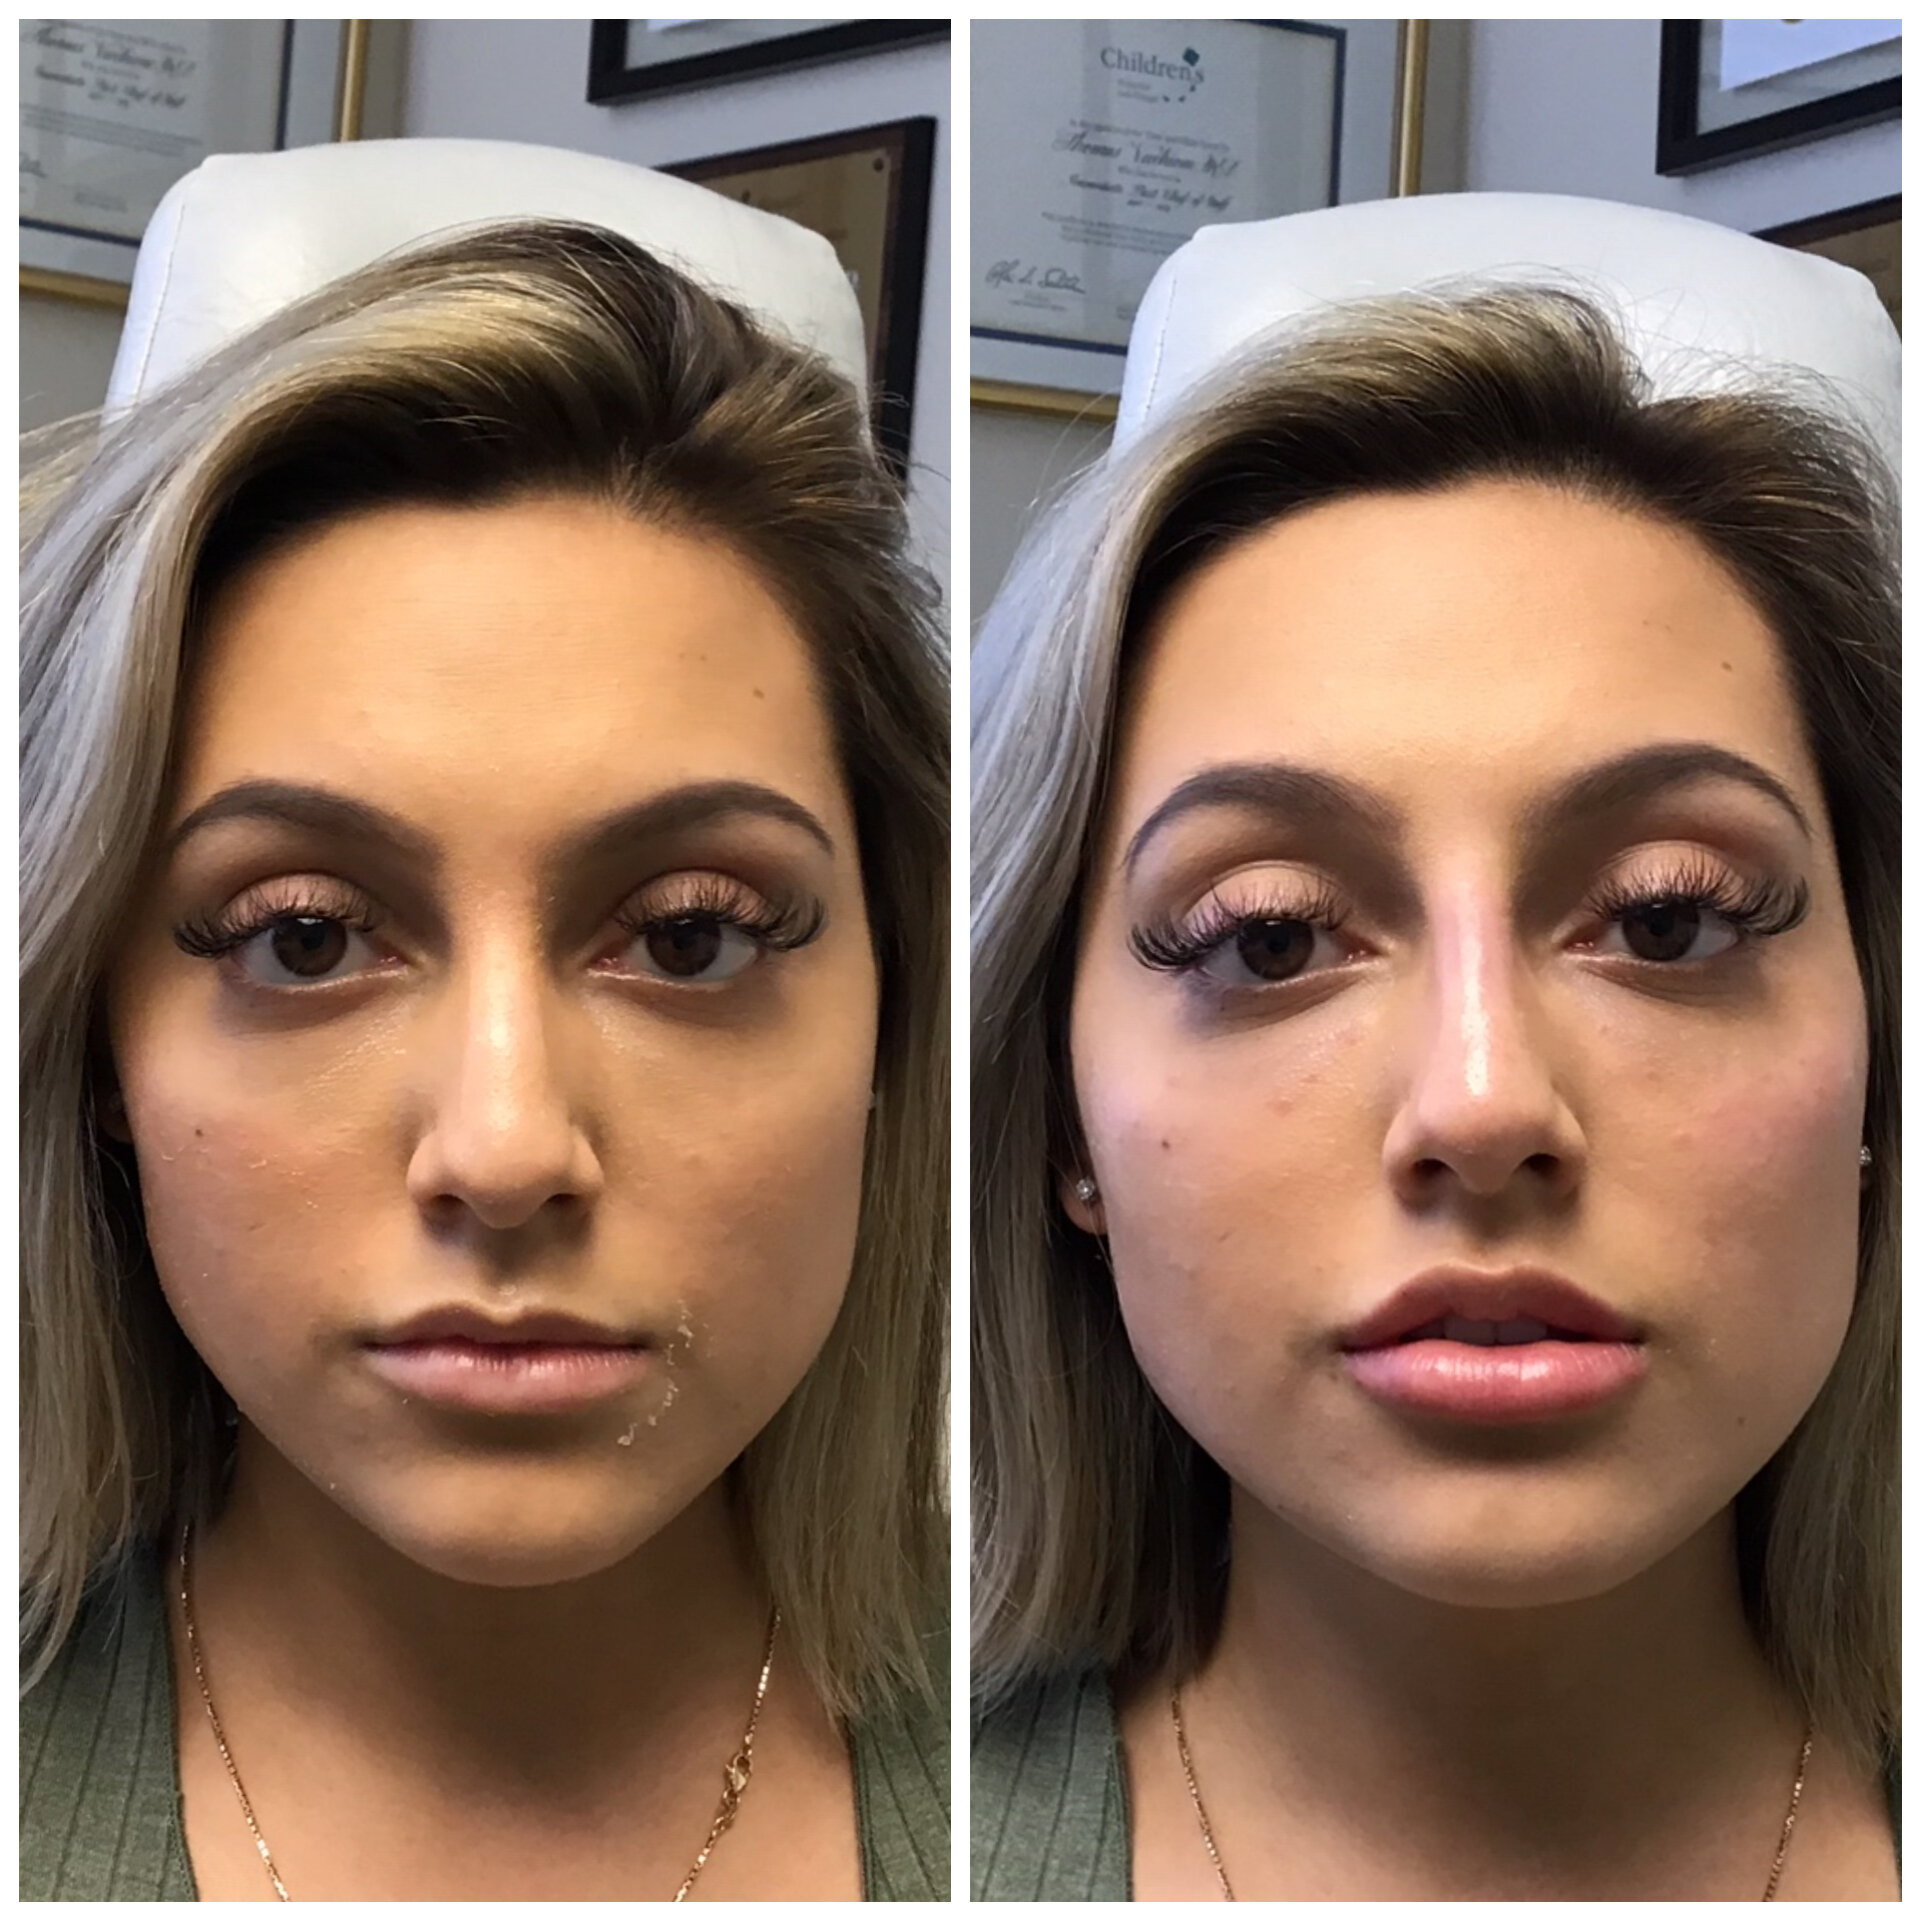 Botox and Fillers Before and After Photos, San Diego - Charlie Chen, MD  Plastic & Reconstructive Surgery